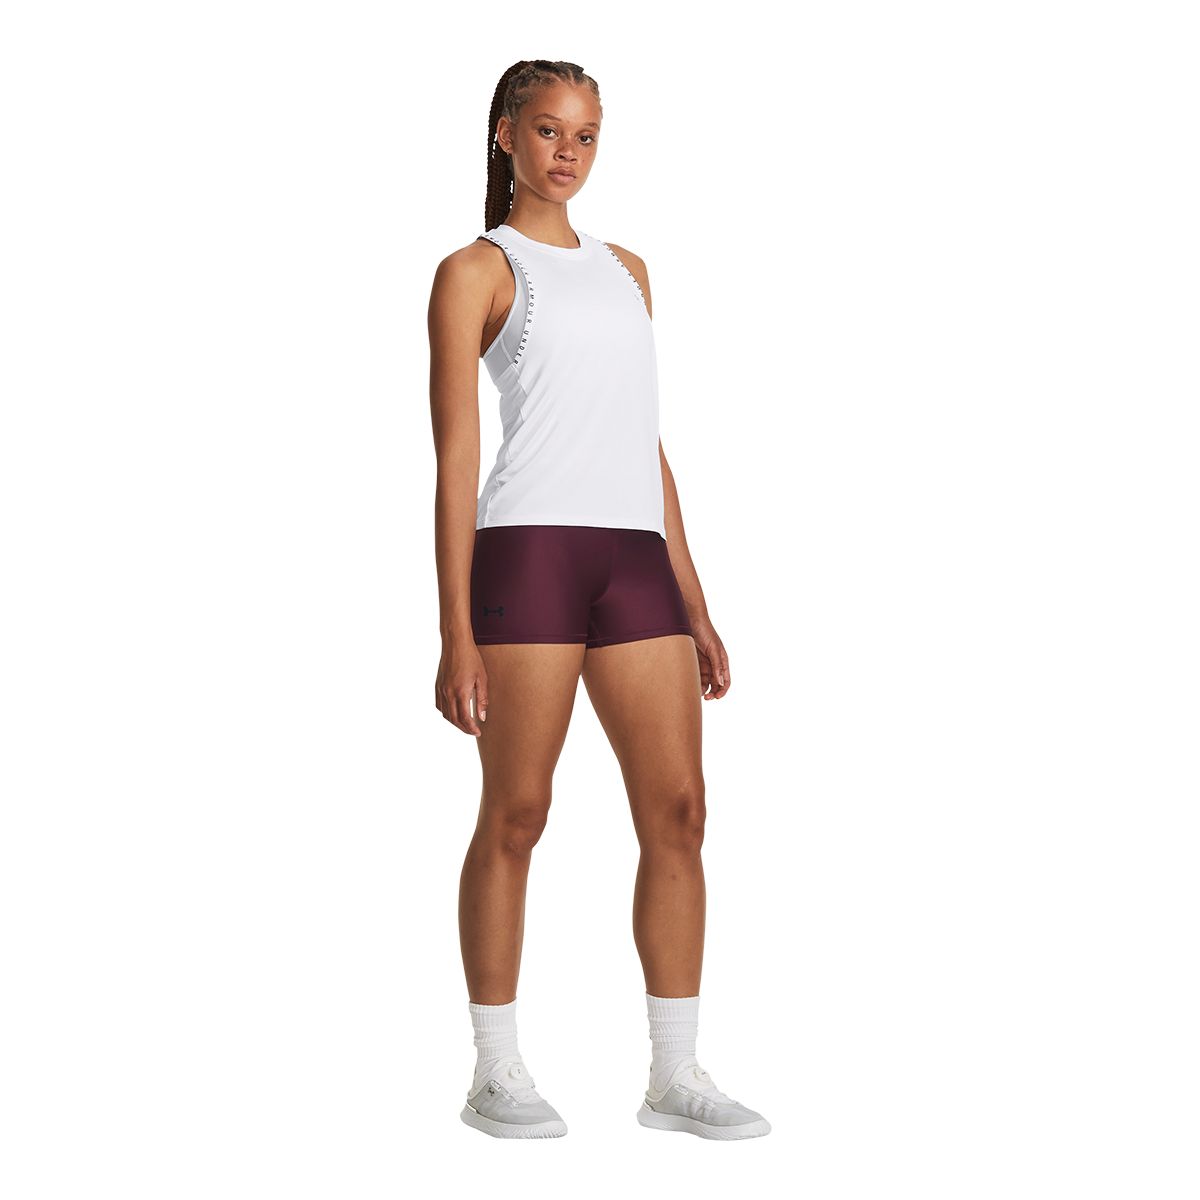 https://media-www.sportchek.ca/product/div-03-softgoods/dpt-70-athletic-clothing/sdpt-02-womens/334154284/ua-w-armour-mid-rise-shorty-8ef9abbb-b079-46a4-878c-601d9c648e47-jpgrendition.jpg?imdensity=1&imwidth=1244&impolicy=mZoom